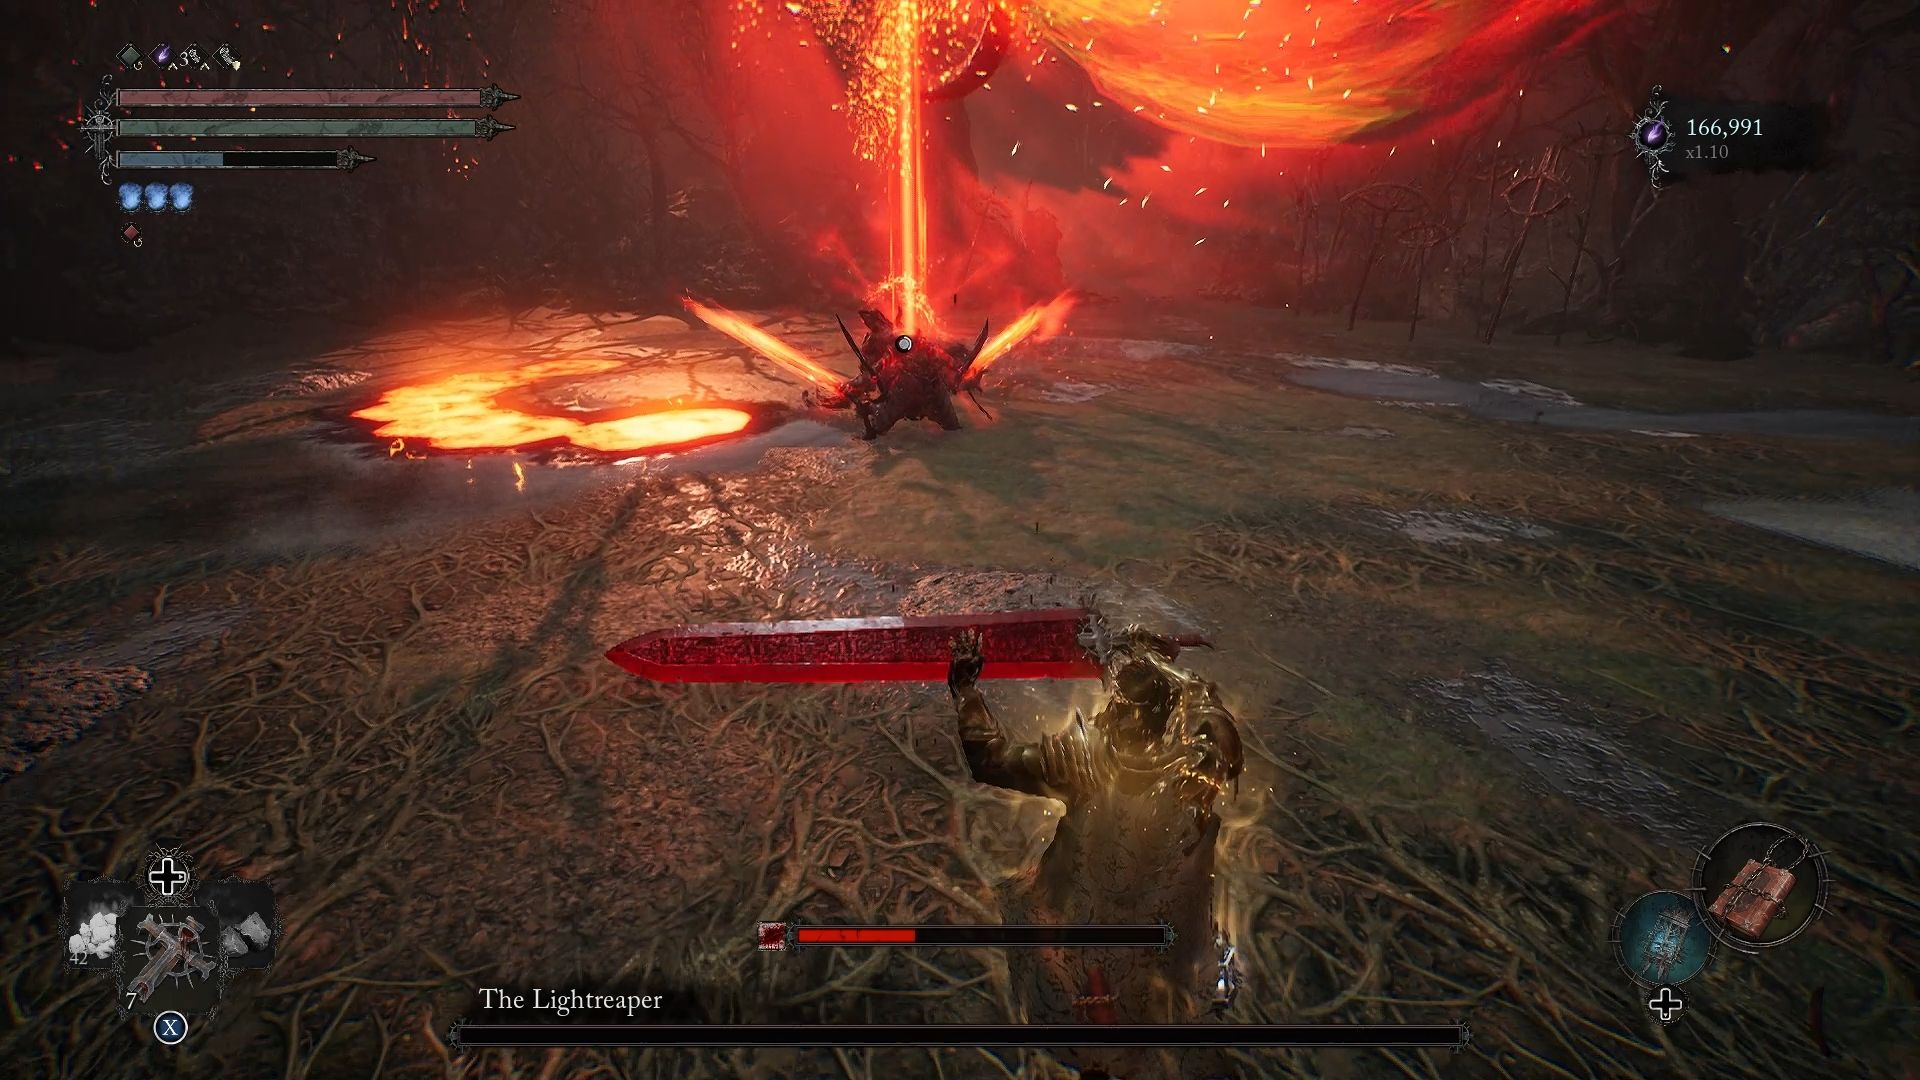 Player defeated the Lightreaper Lords of the Fallen